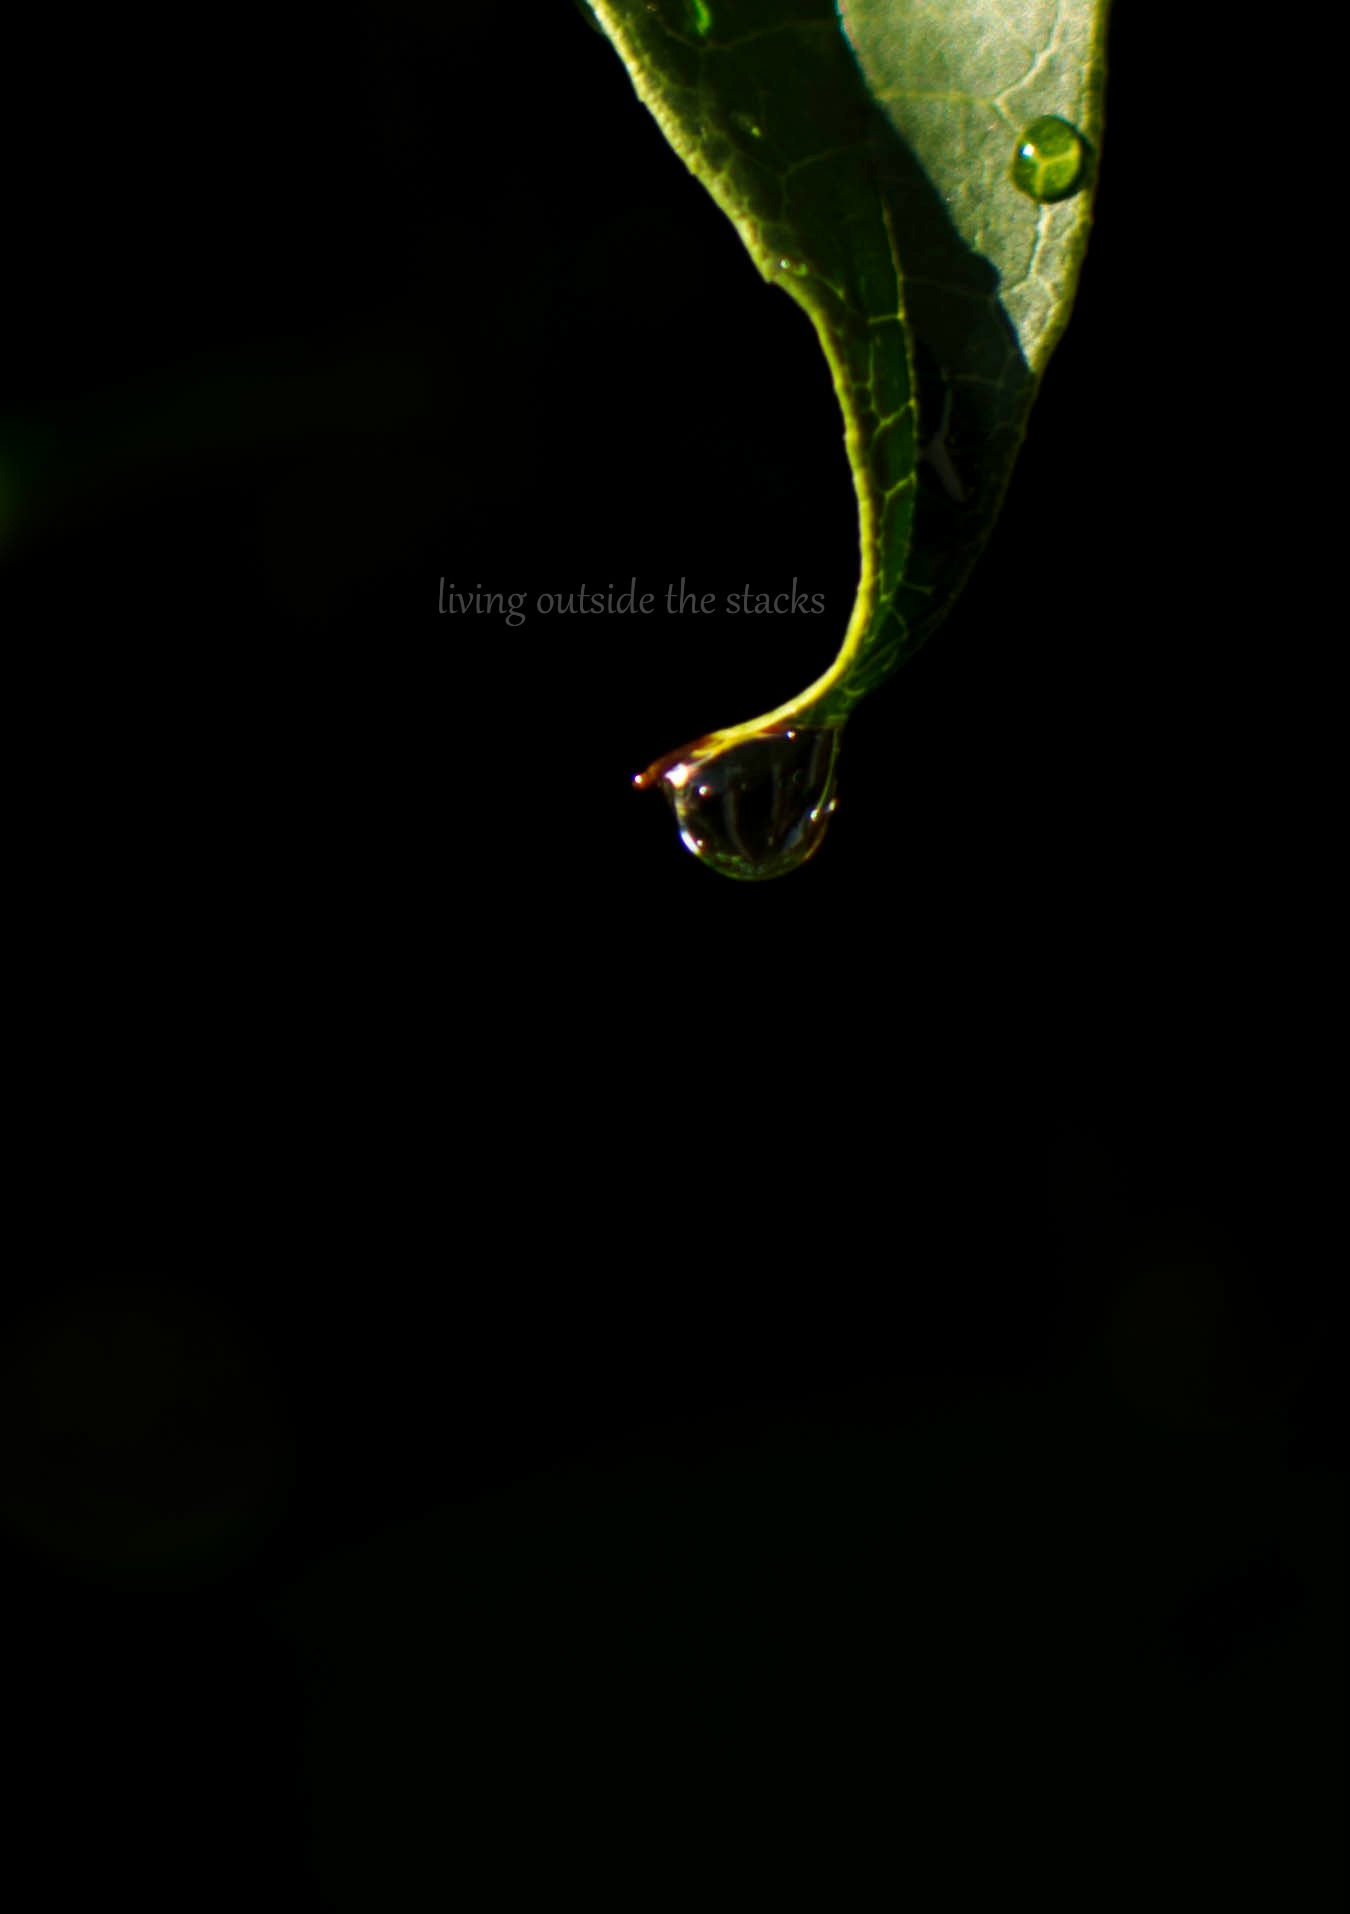 Leaf with Water Droplet {living outside the stacks}